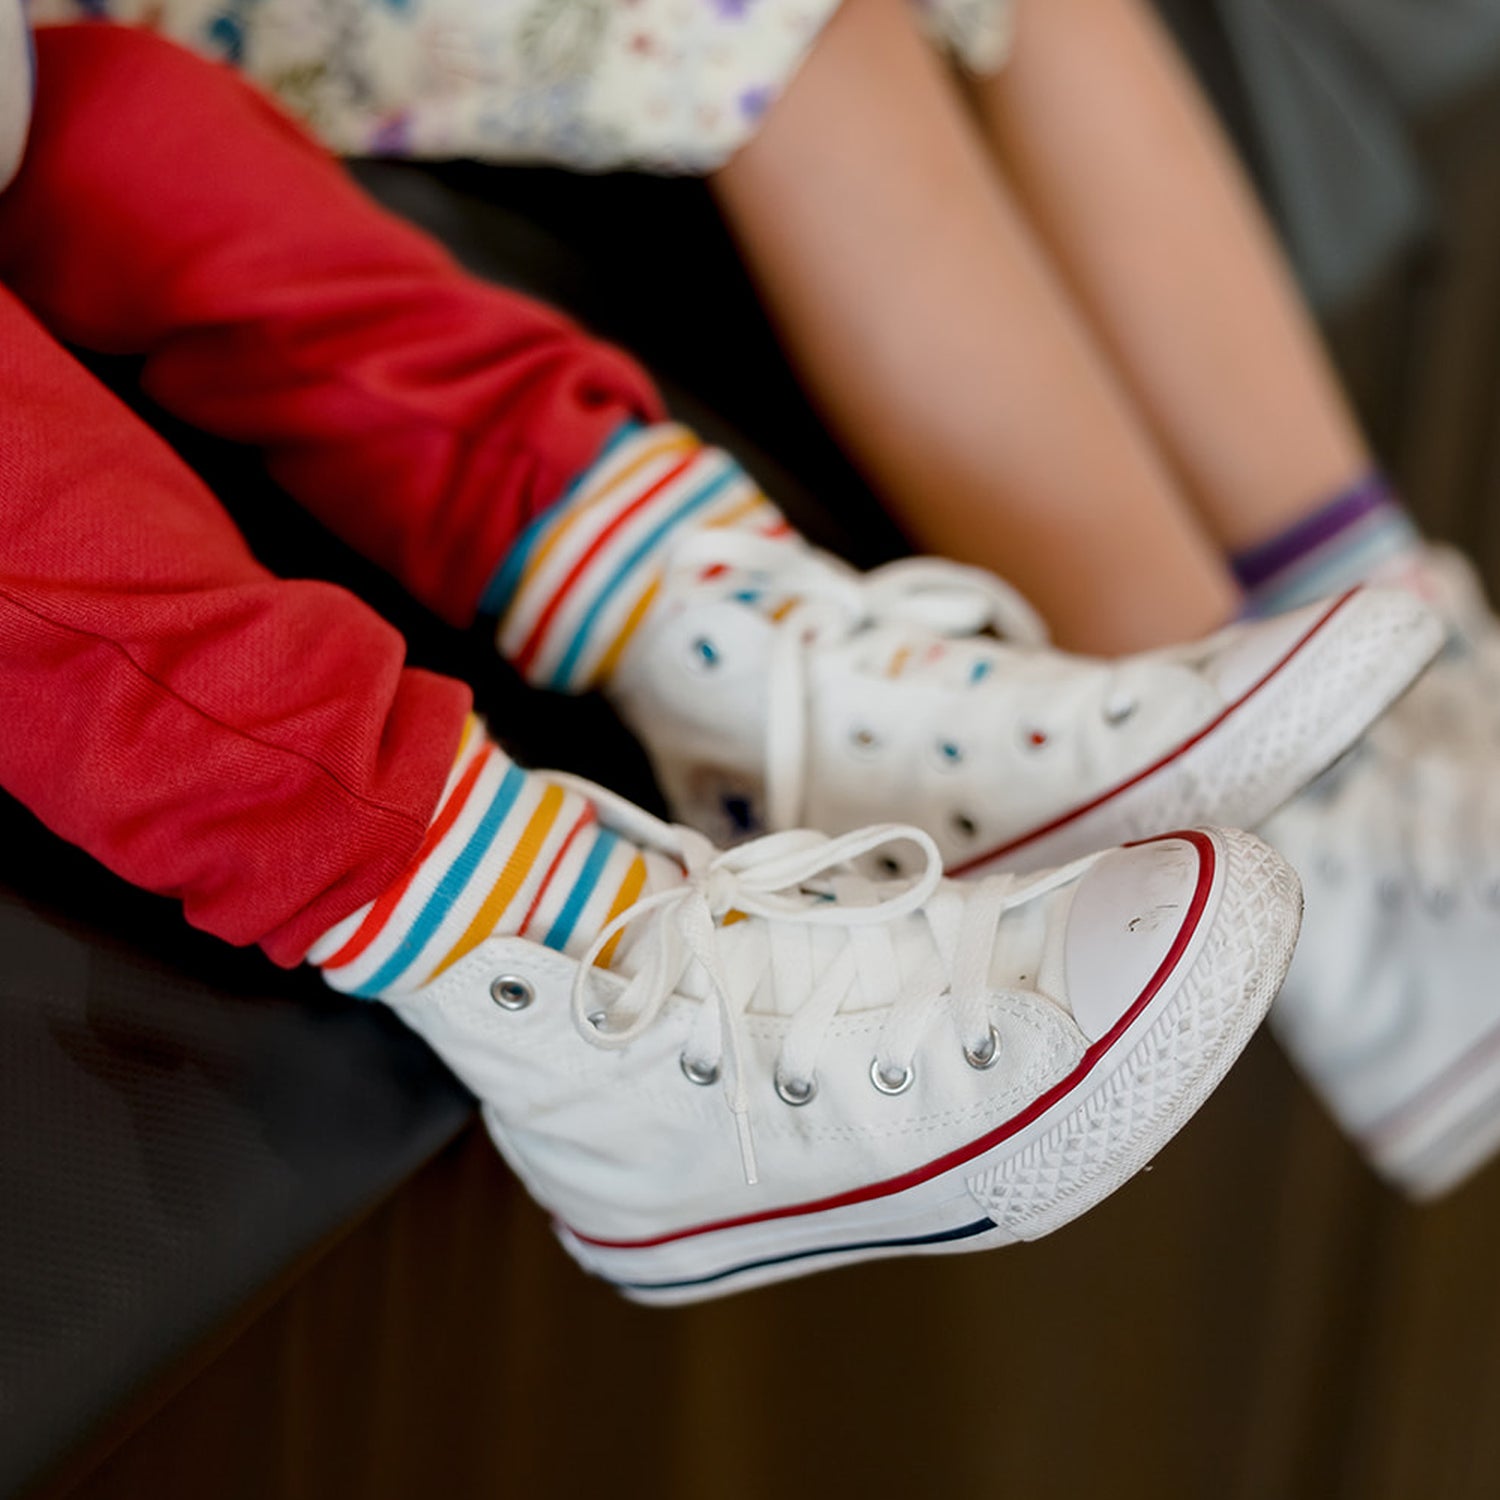 Adorable kids’ socks featuring fun and lively patterns